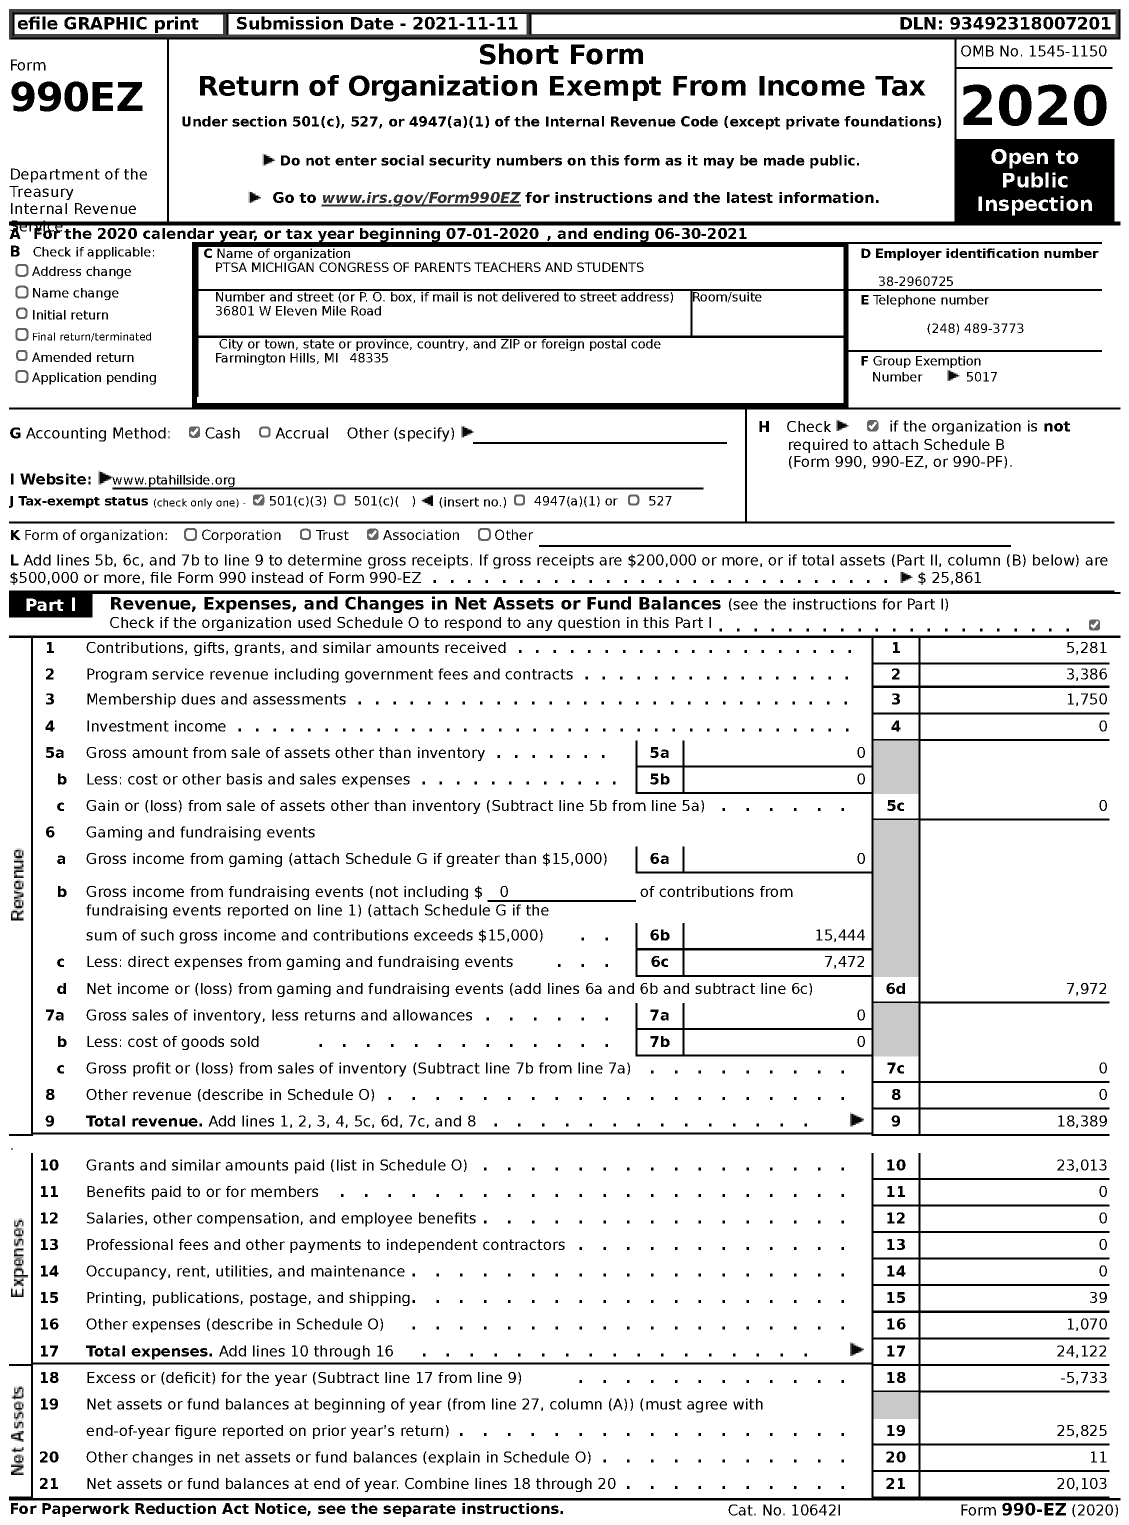 Image of first page of 2020 Form 990EZ for Ptsa Michigan Congress of Parents Teachers and Students / Hillside Elementary PTA